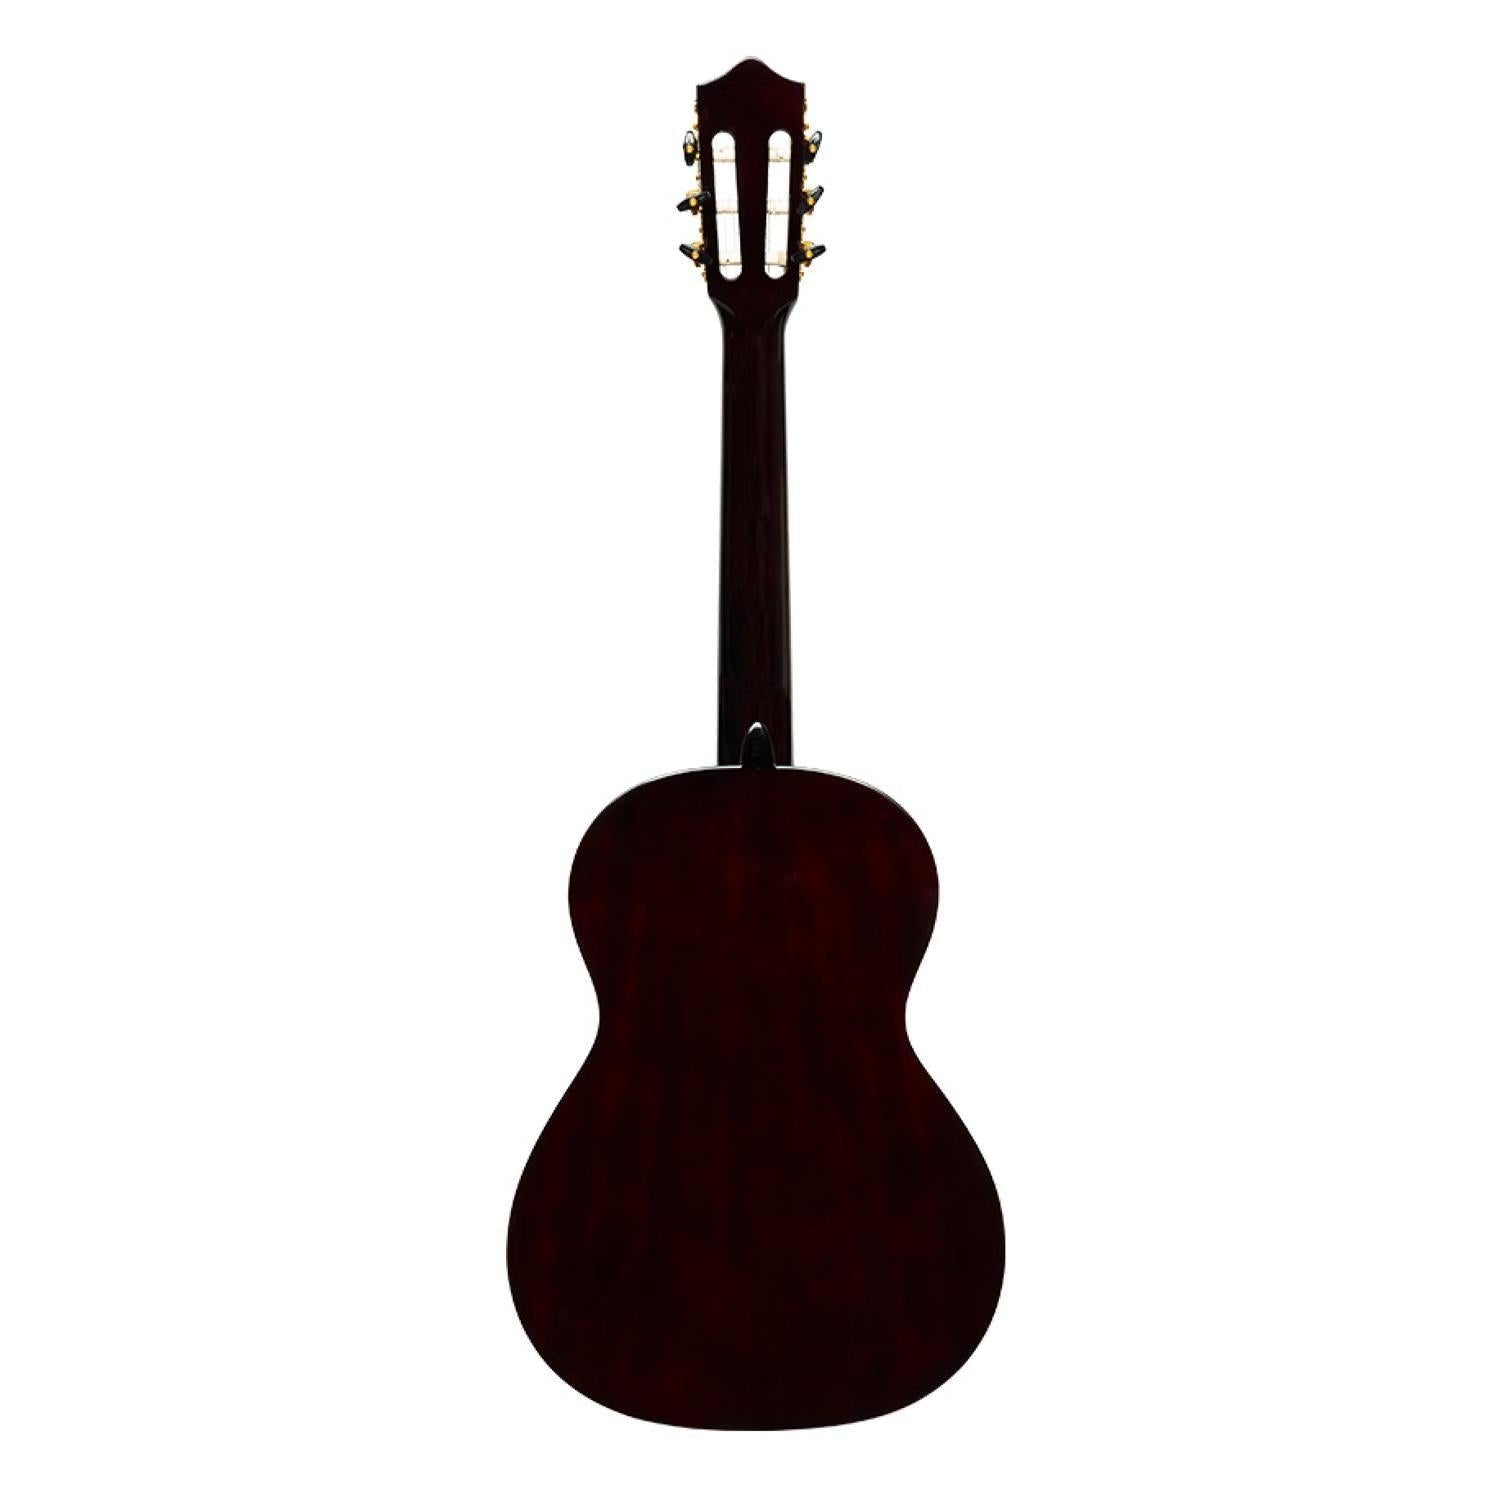 Stagg SCL60 3/4-NAT Classical Guitar with spruce top - DY Pro Audio